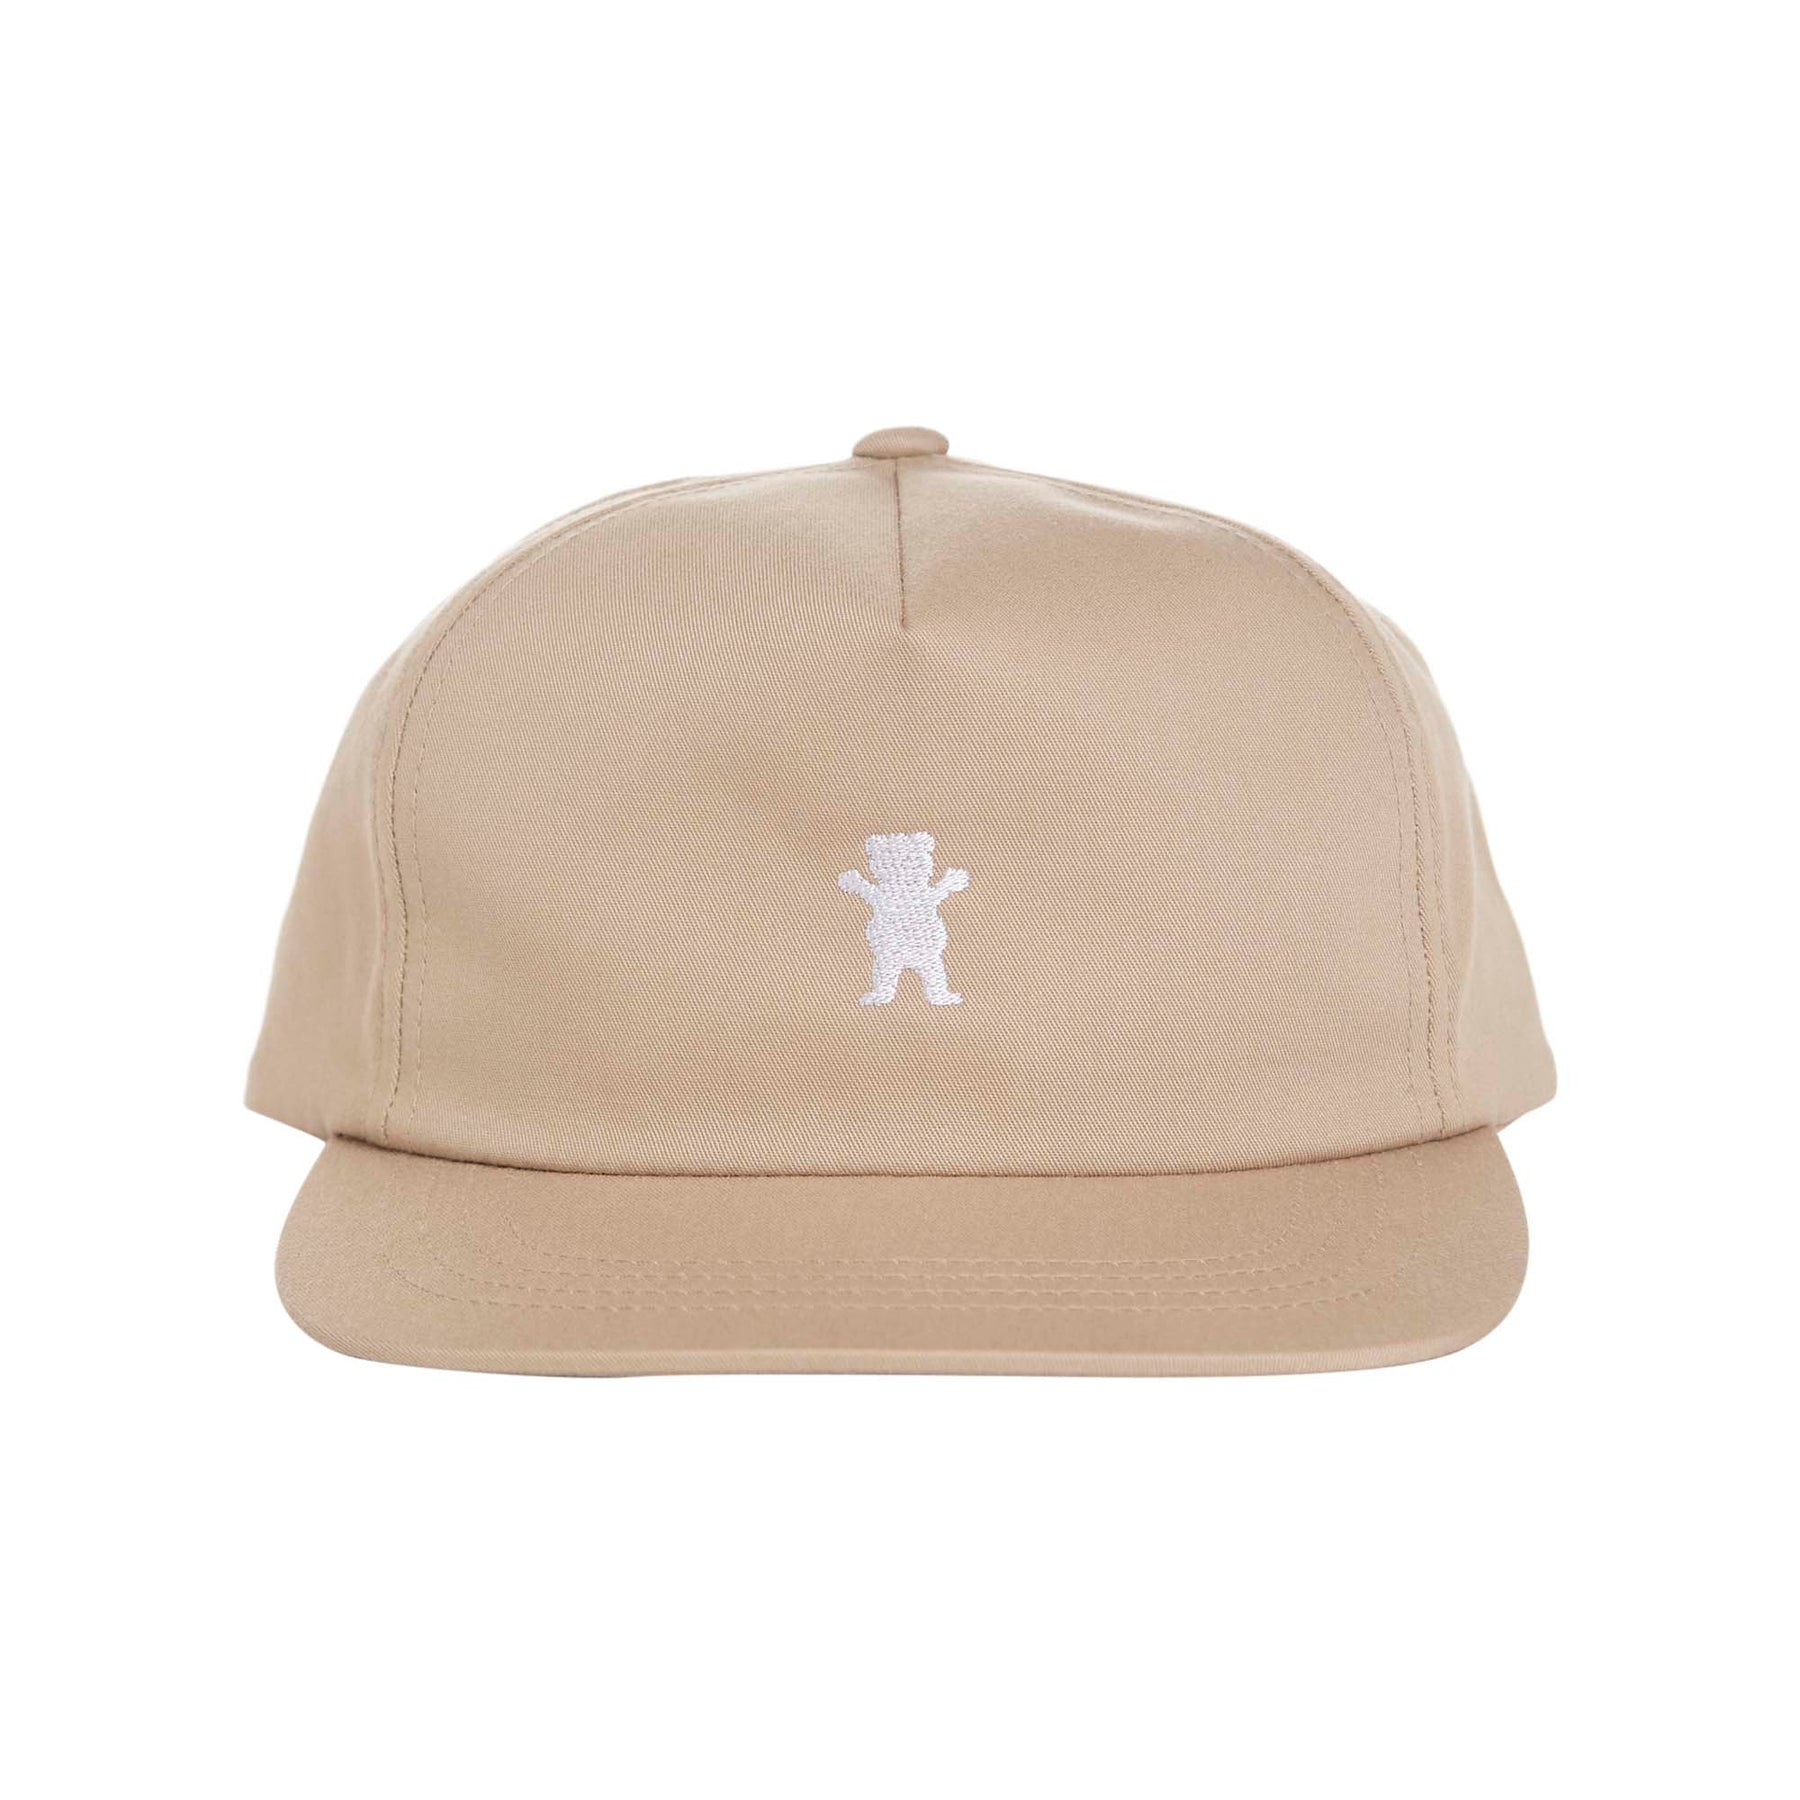 Grizzly Griptape - OG Bear Unstructured Hat in Khaki